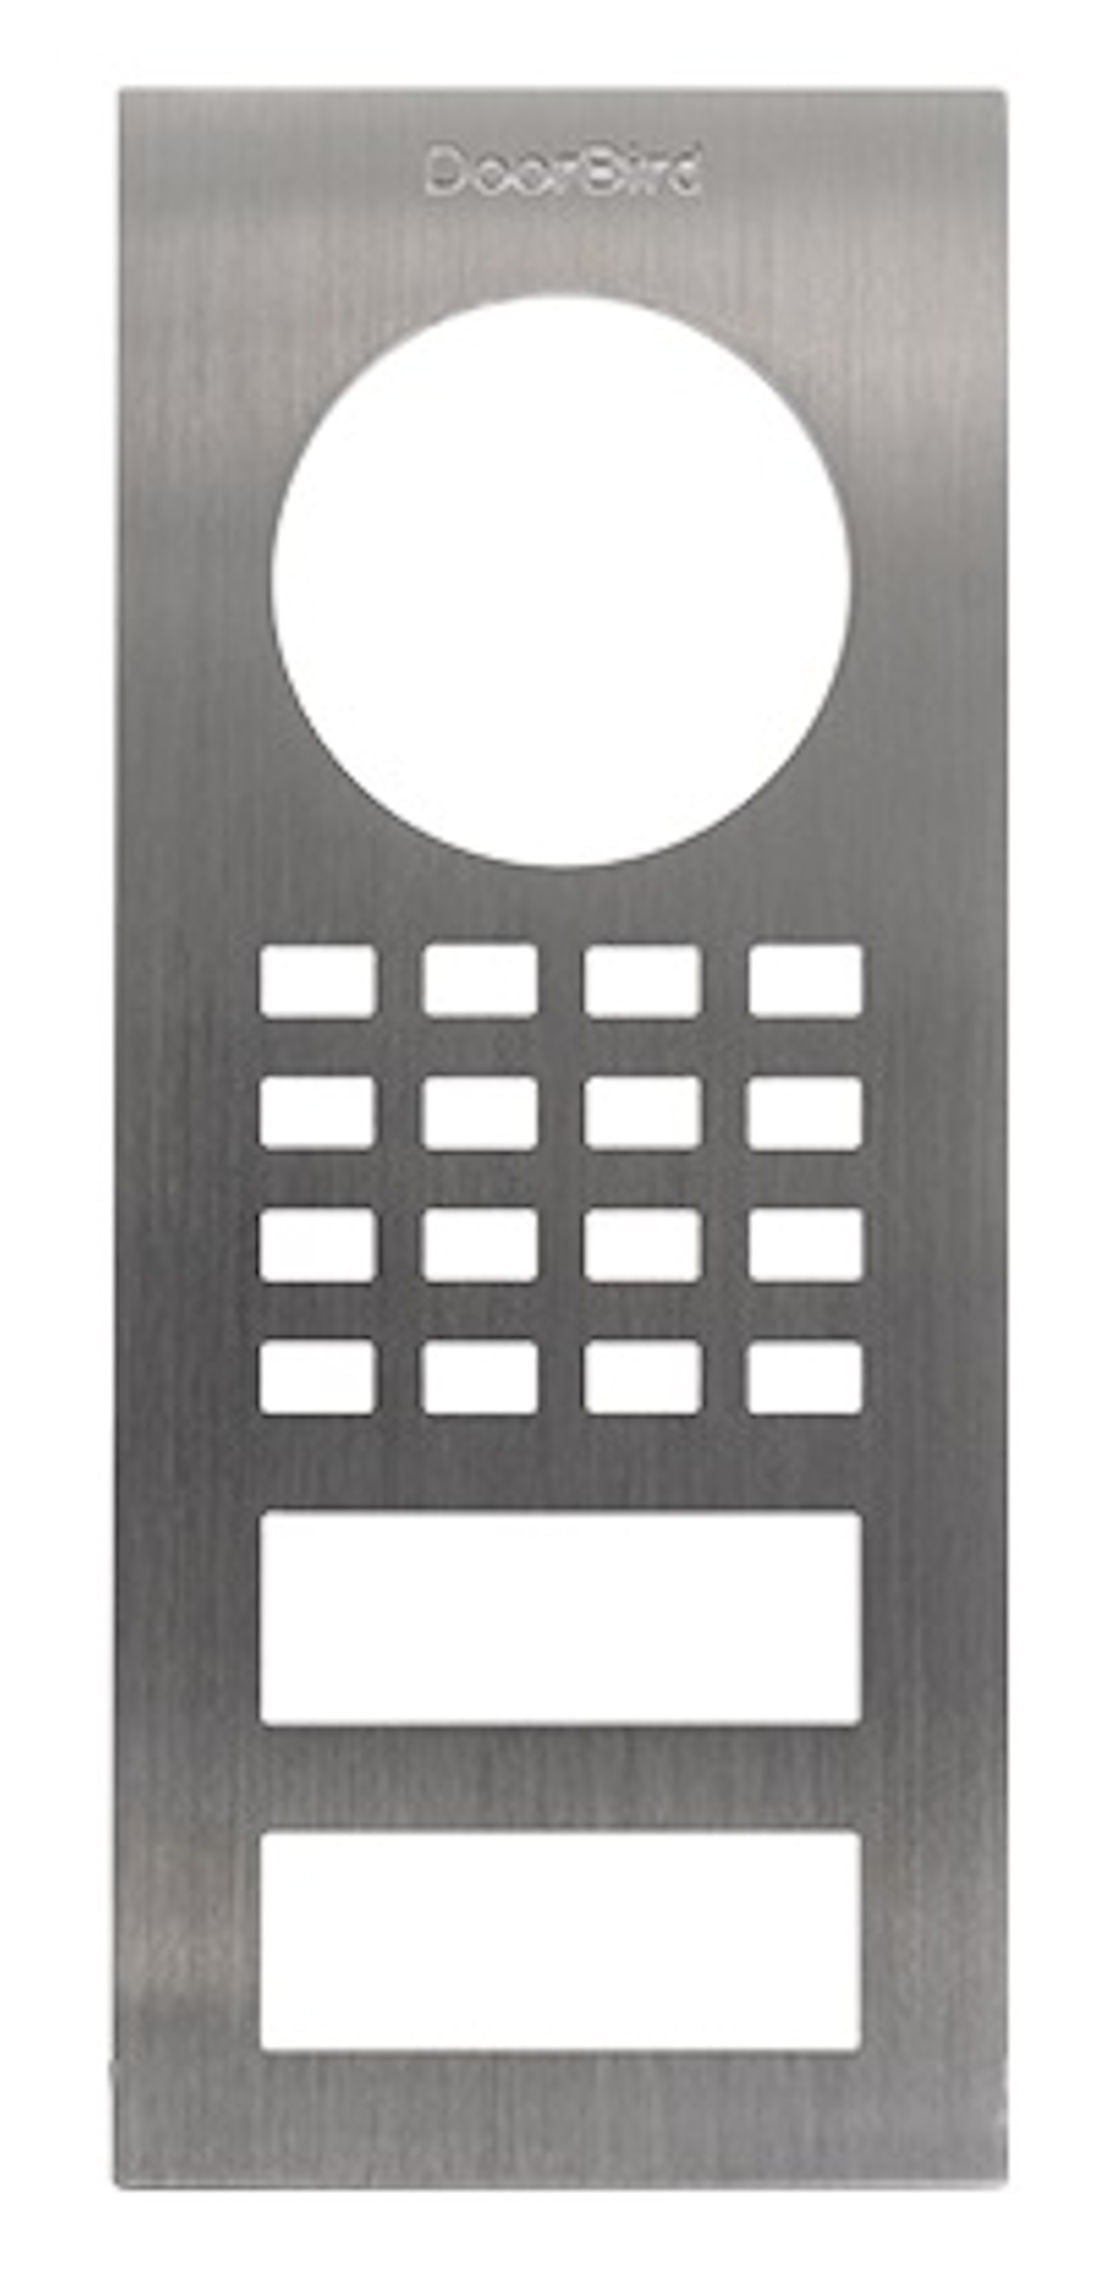 DoorBird D1101V FP Front Panel, Surface Mount Replacement Stainless steel V2A, brushed